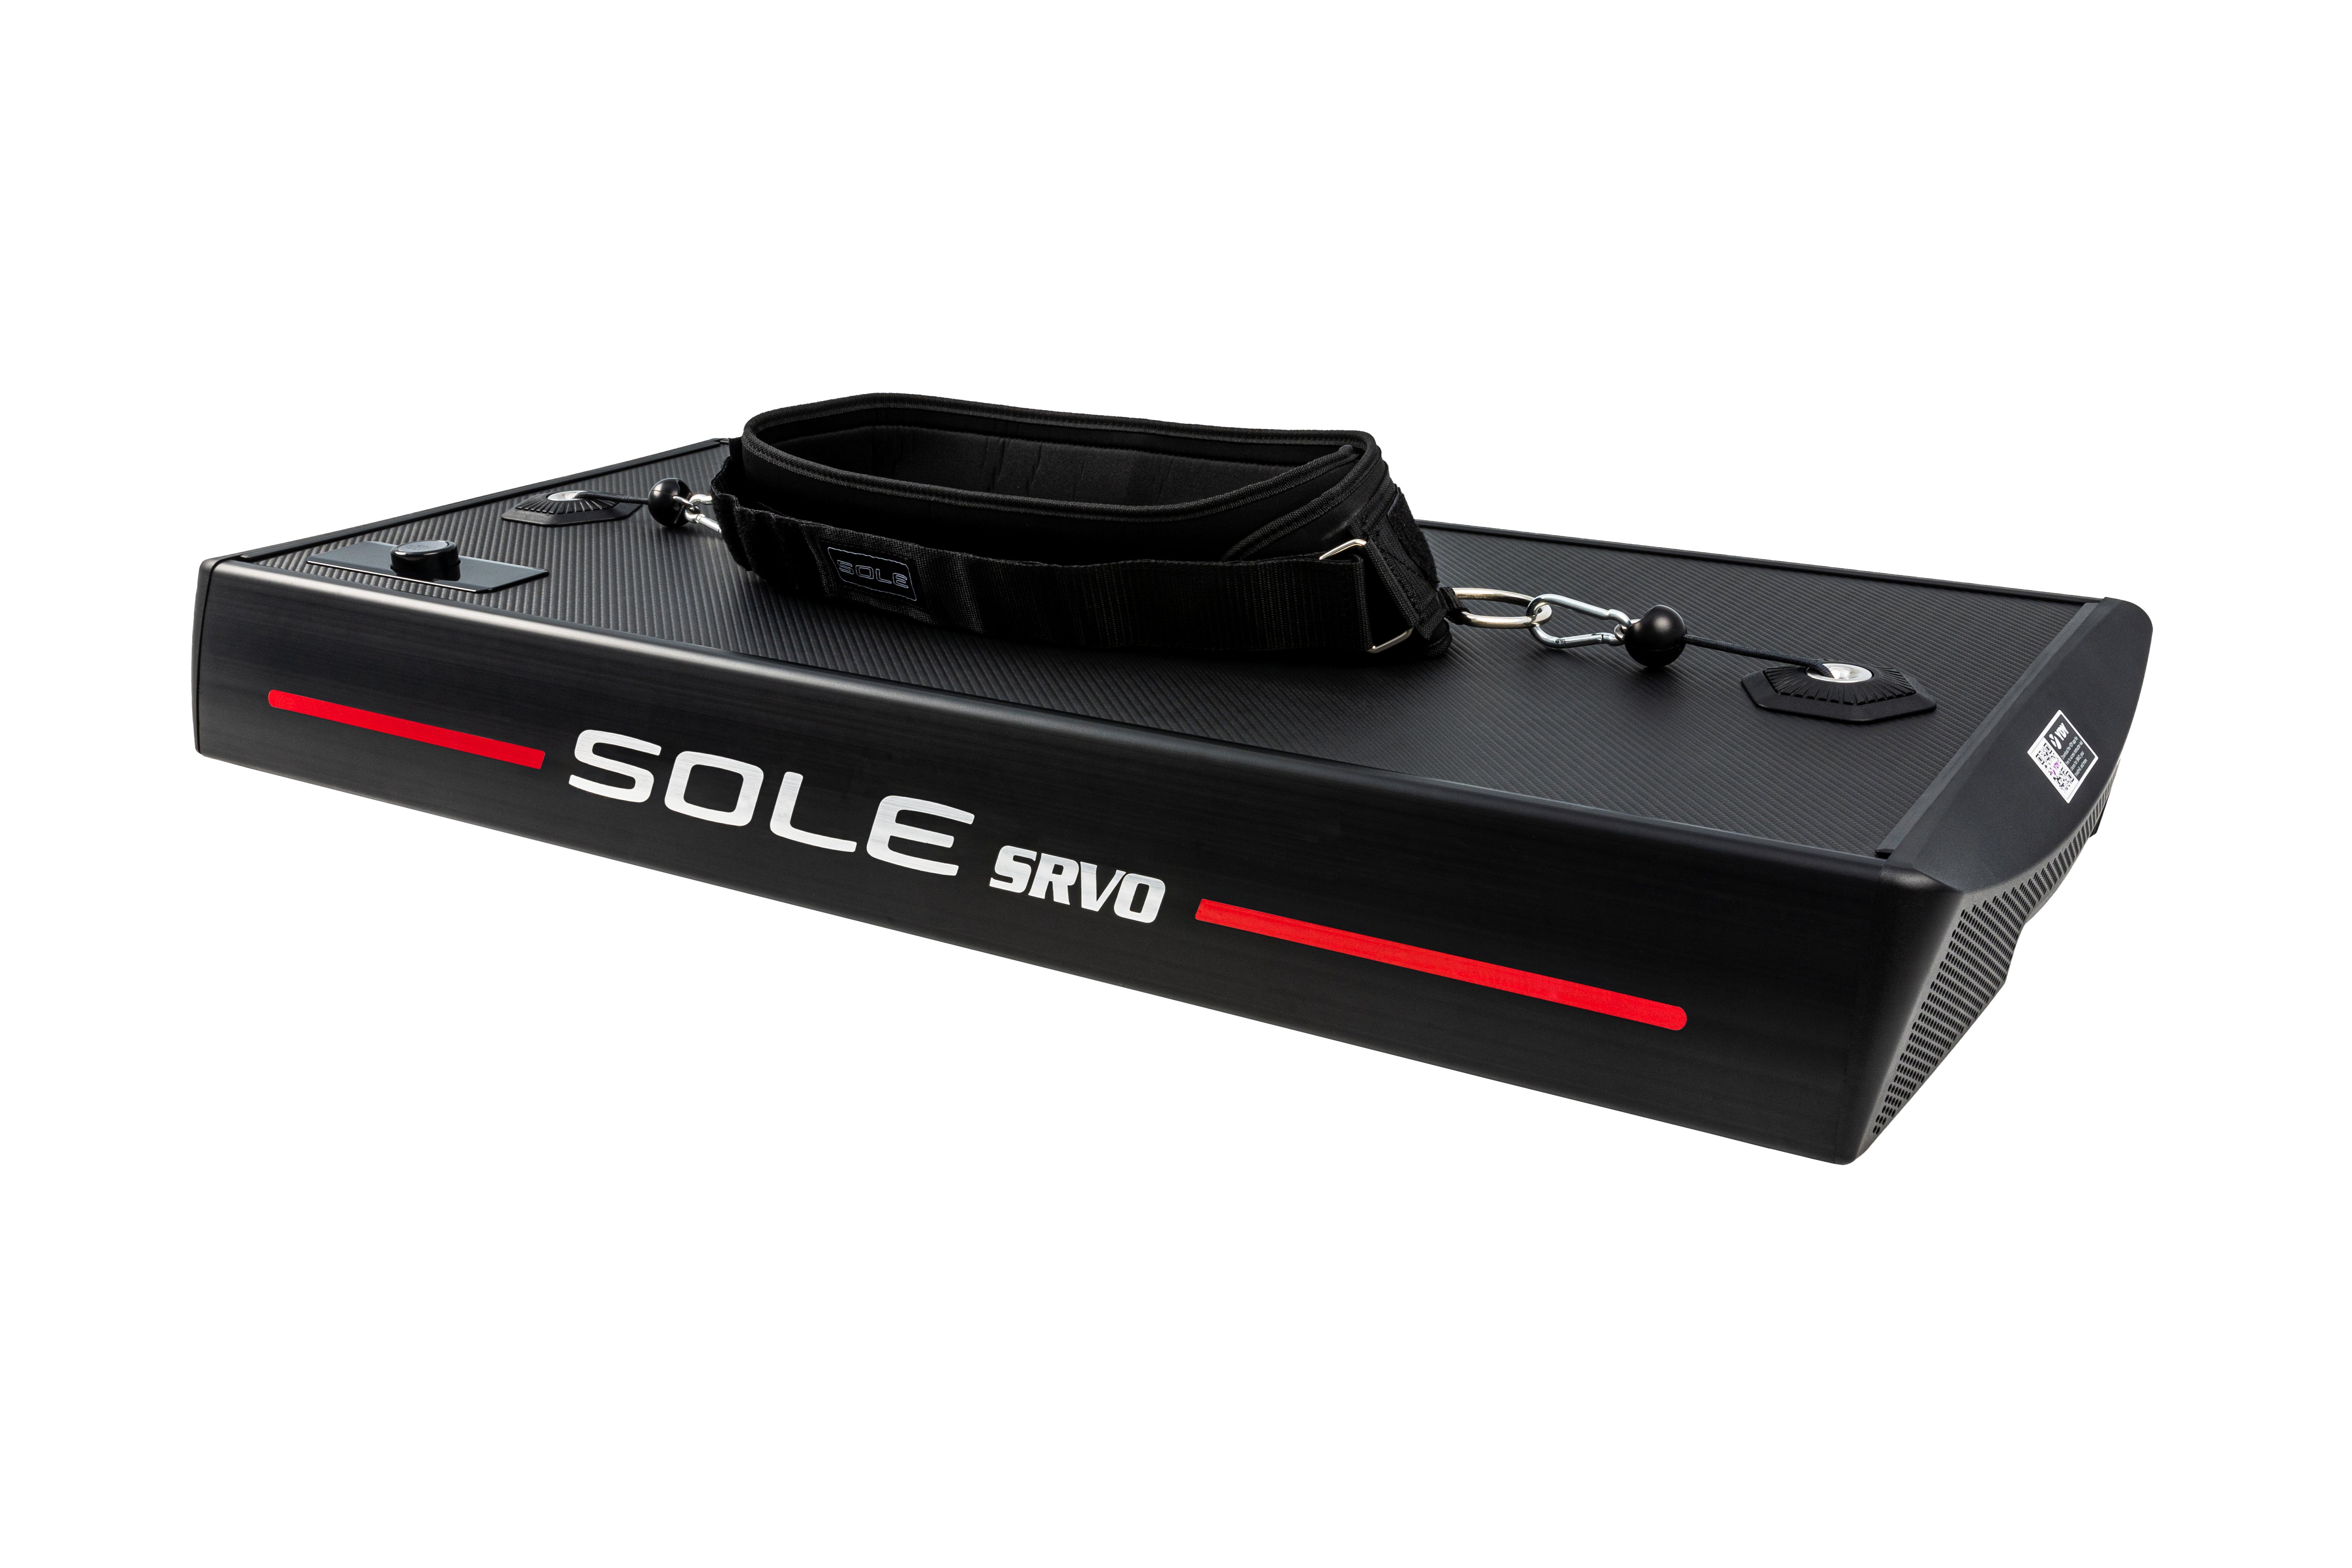 Side view of the Sole SRVO device displaying its black design, "SOLE SRVO" logo with a red stripe, and an extended retractable handle on top along with the belt attachment.